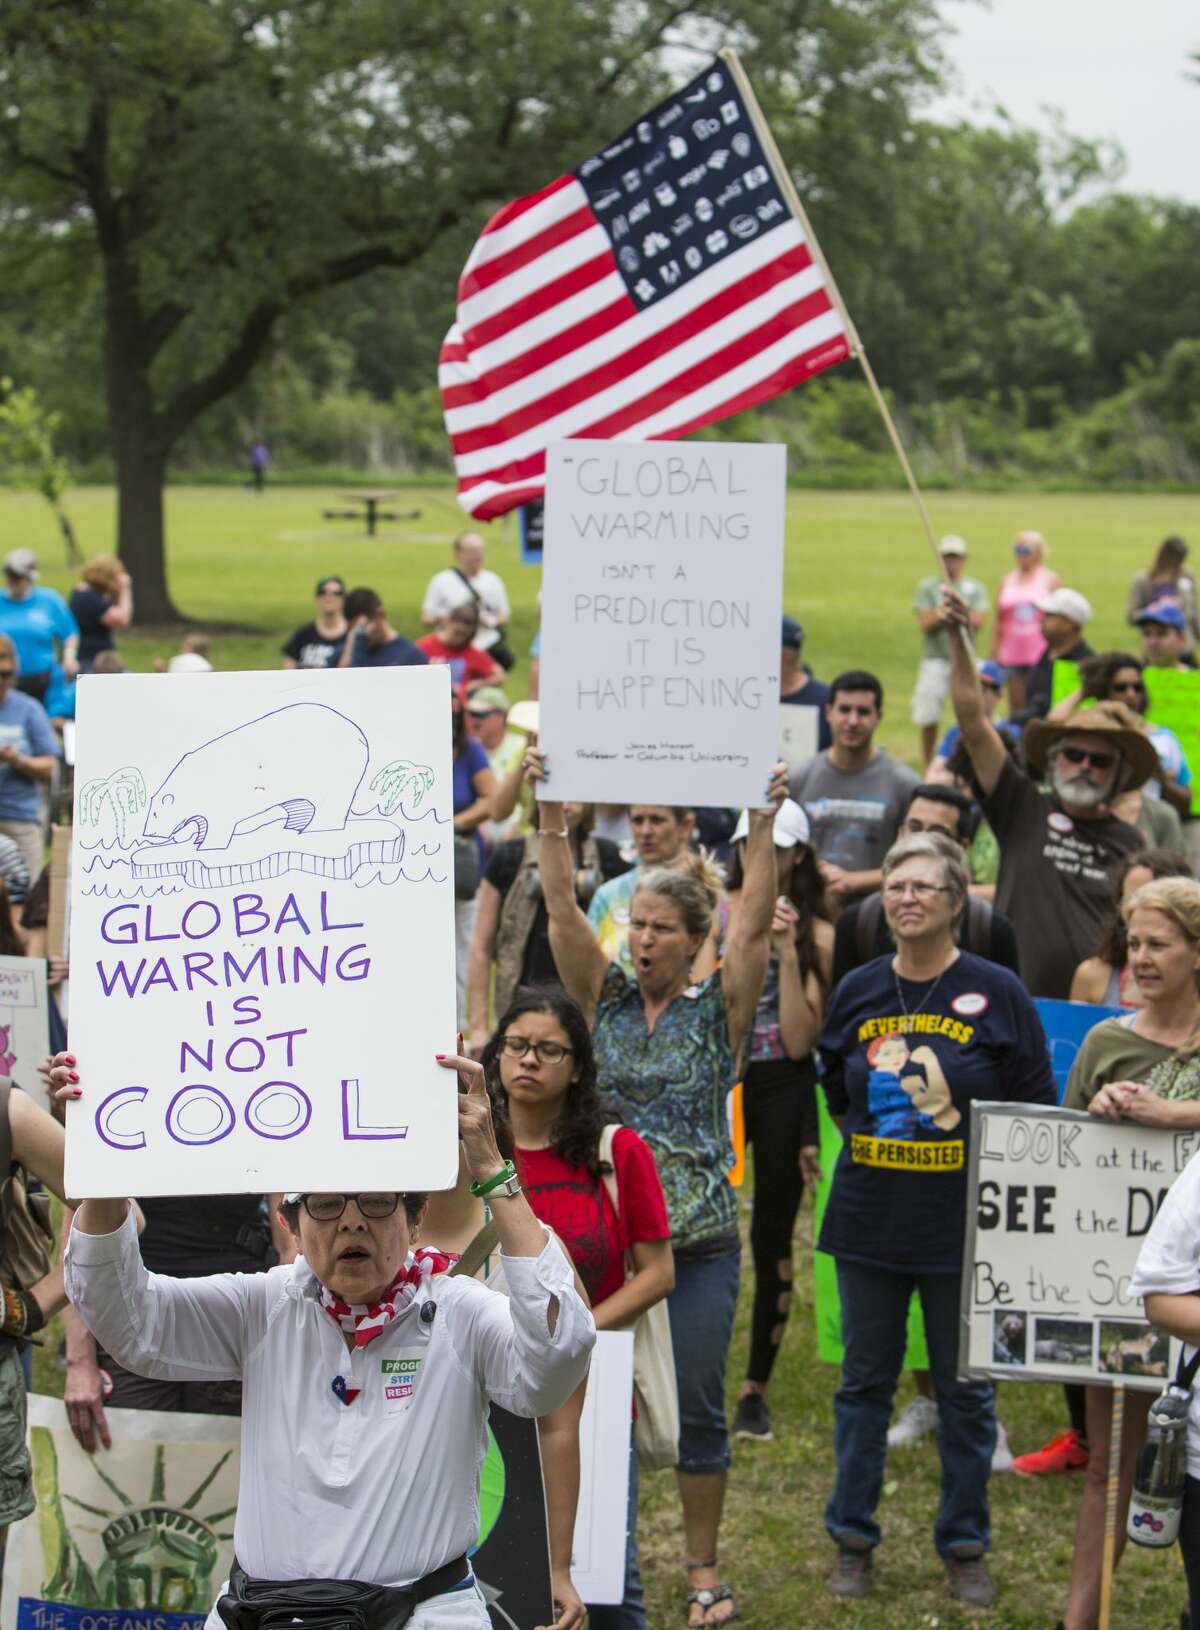 Demonstrators hold up signs while listening to speakers during the Houston Climate March rally at Clinton Park on Saturday, April 29, 2017, in Houston. ( Brett Coomer / Houston Chronicle )